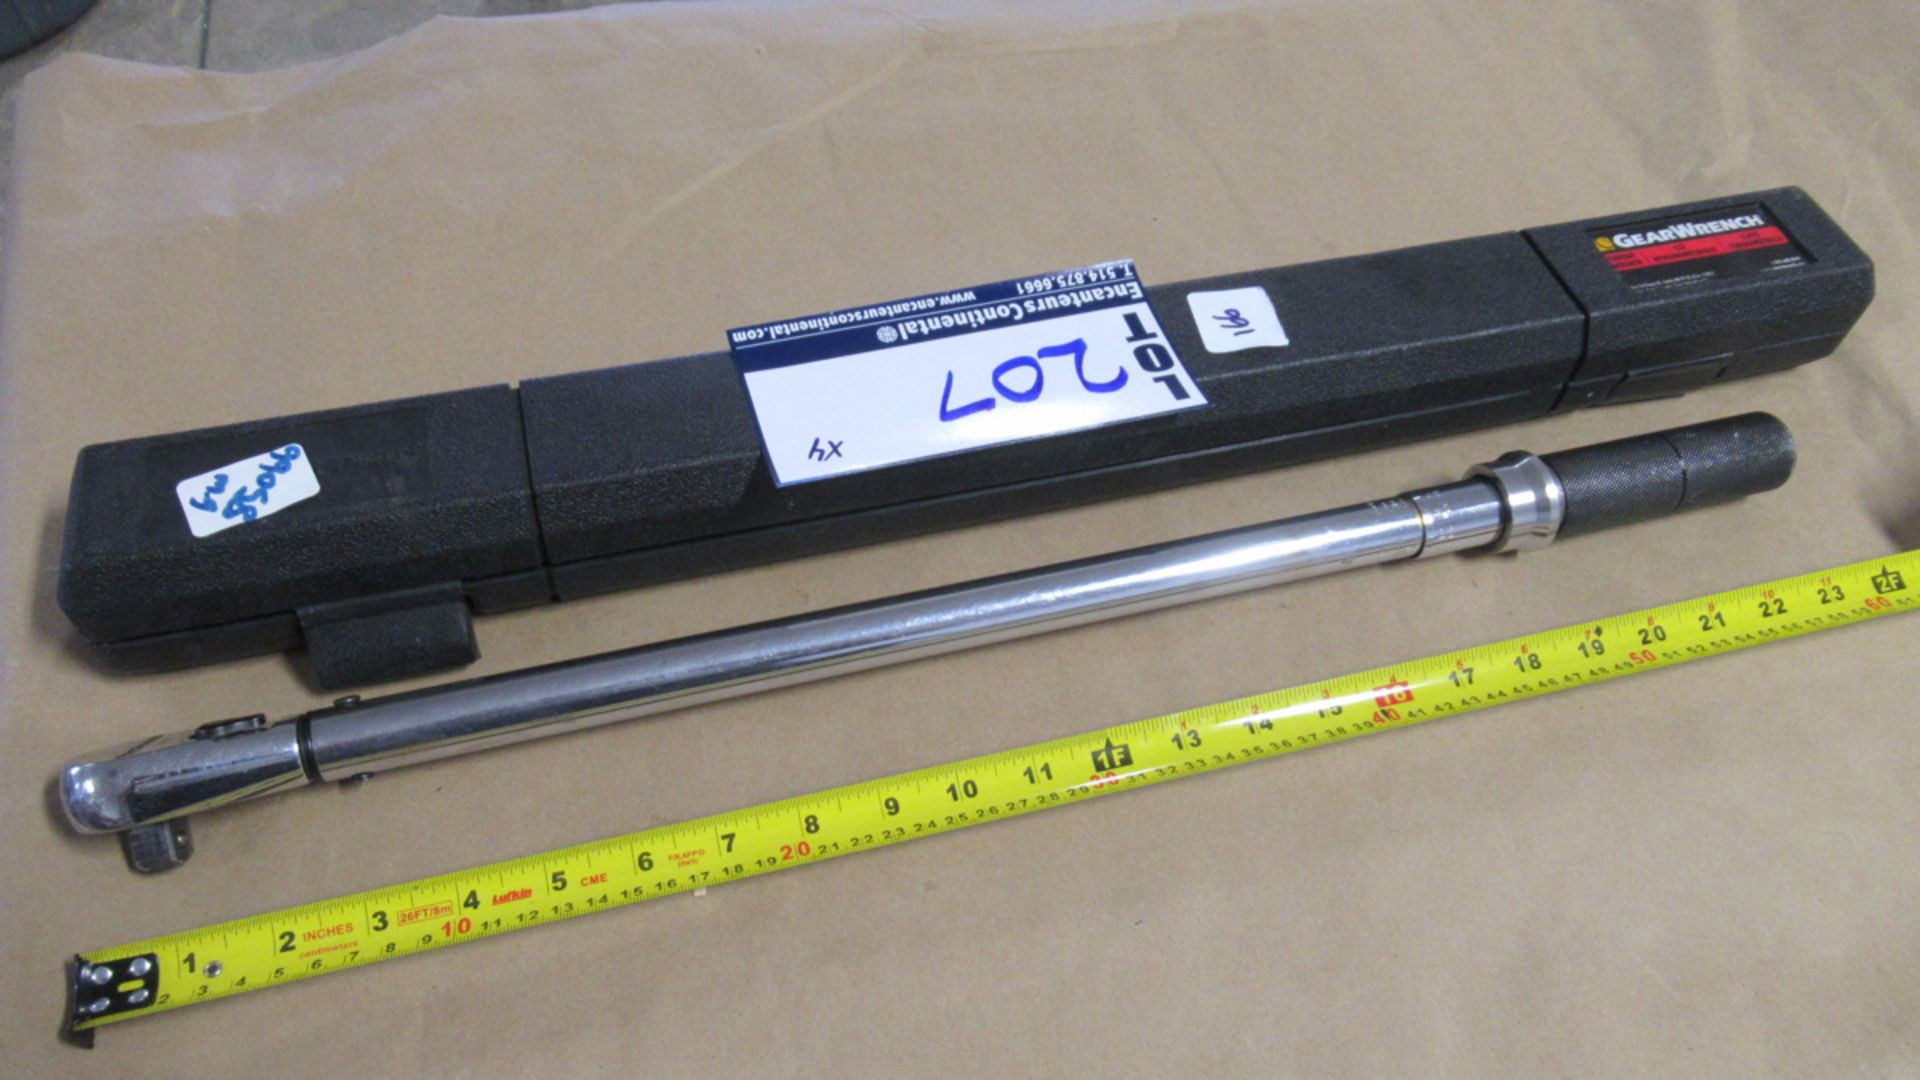 1/2" dr TORQUE WRENCH 30-250 ft-lbs GW 85066